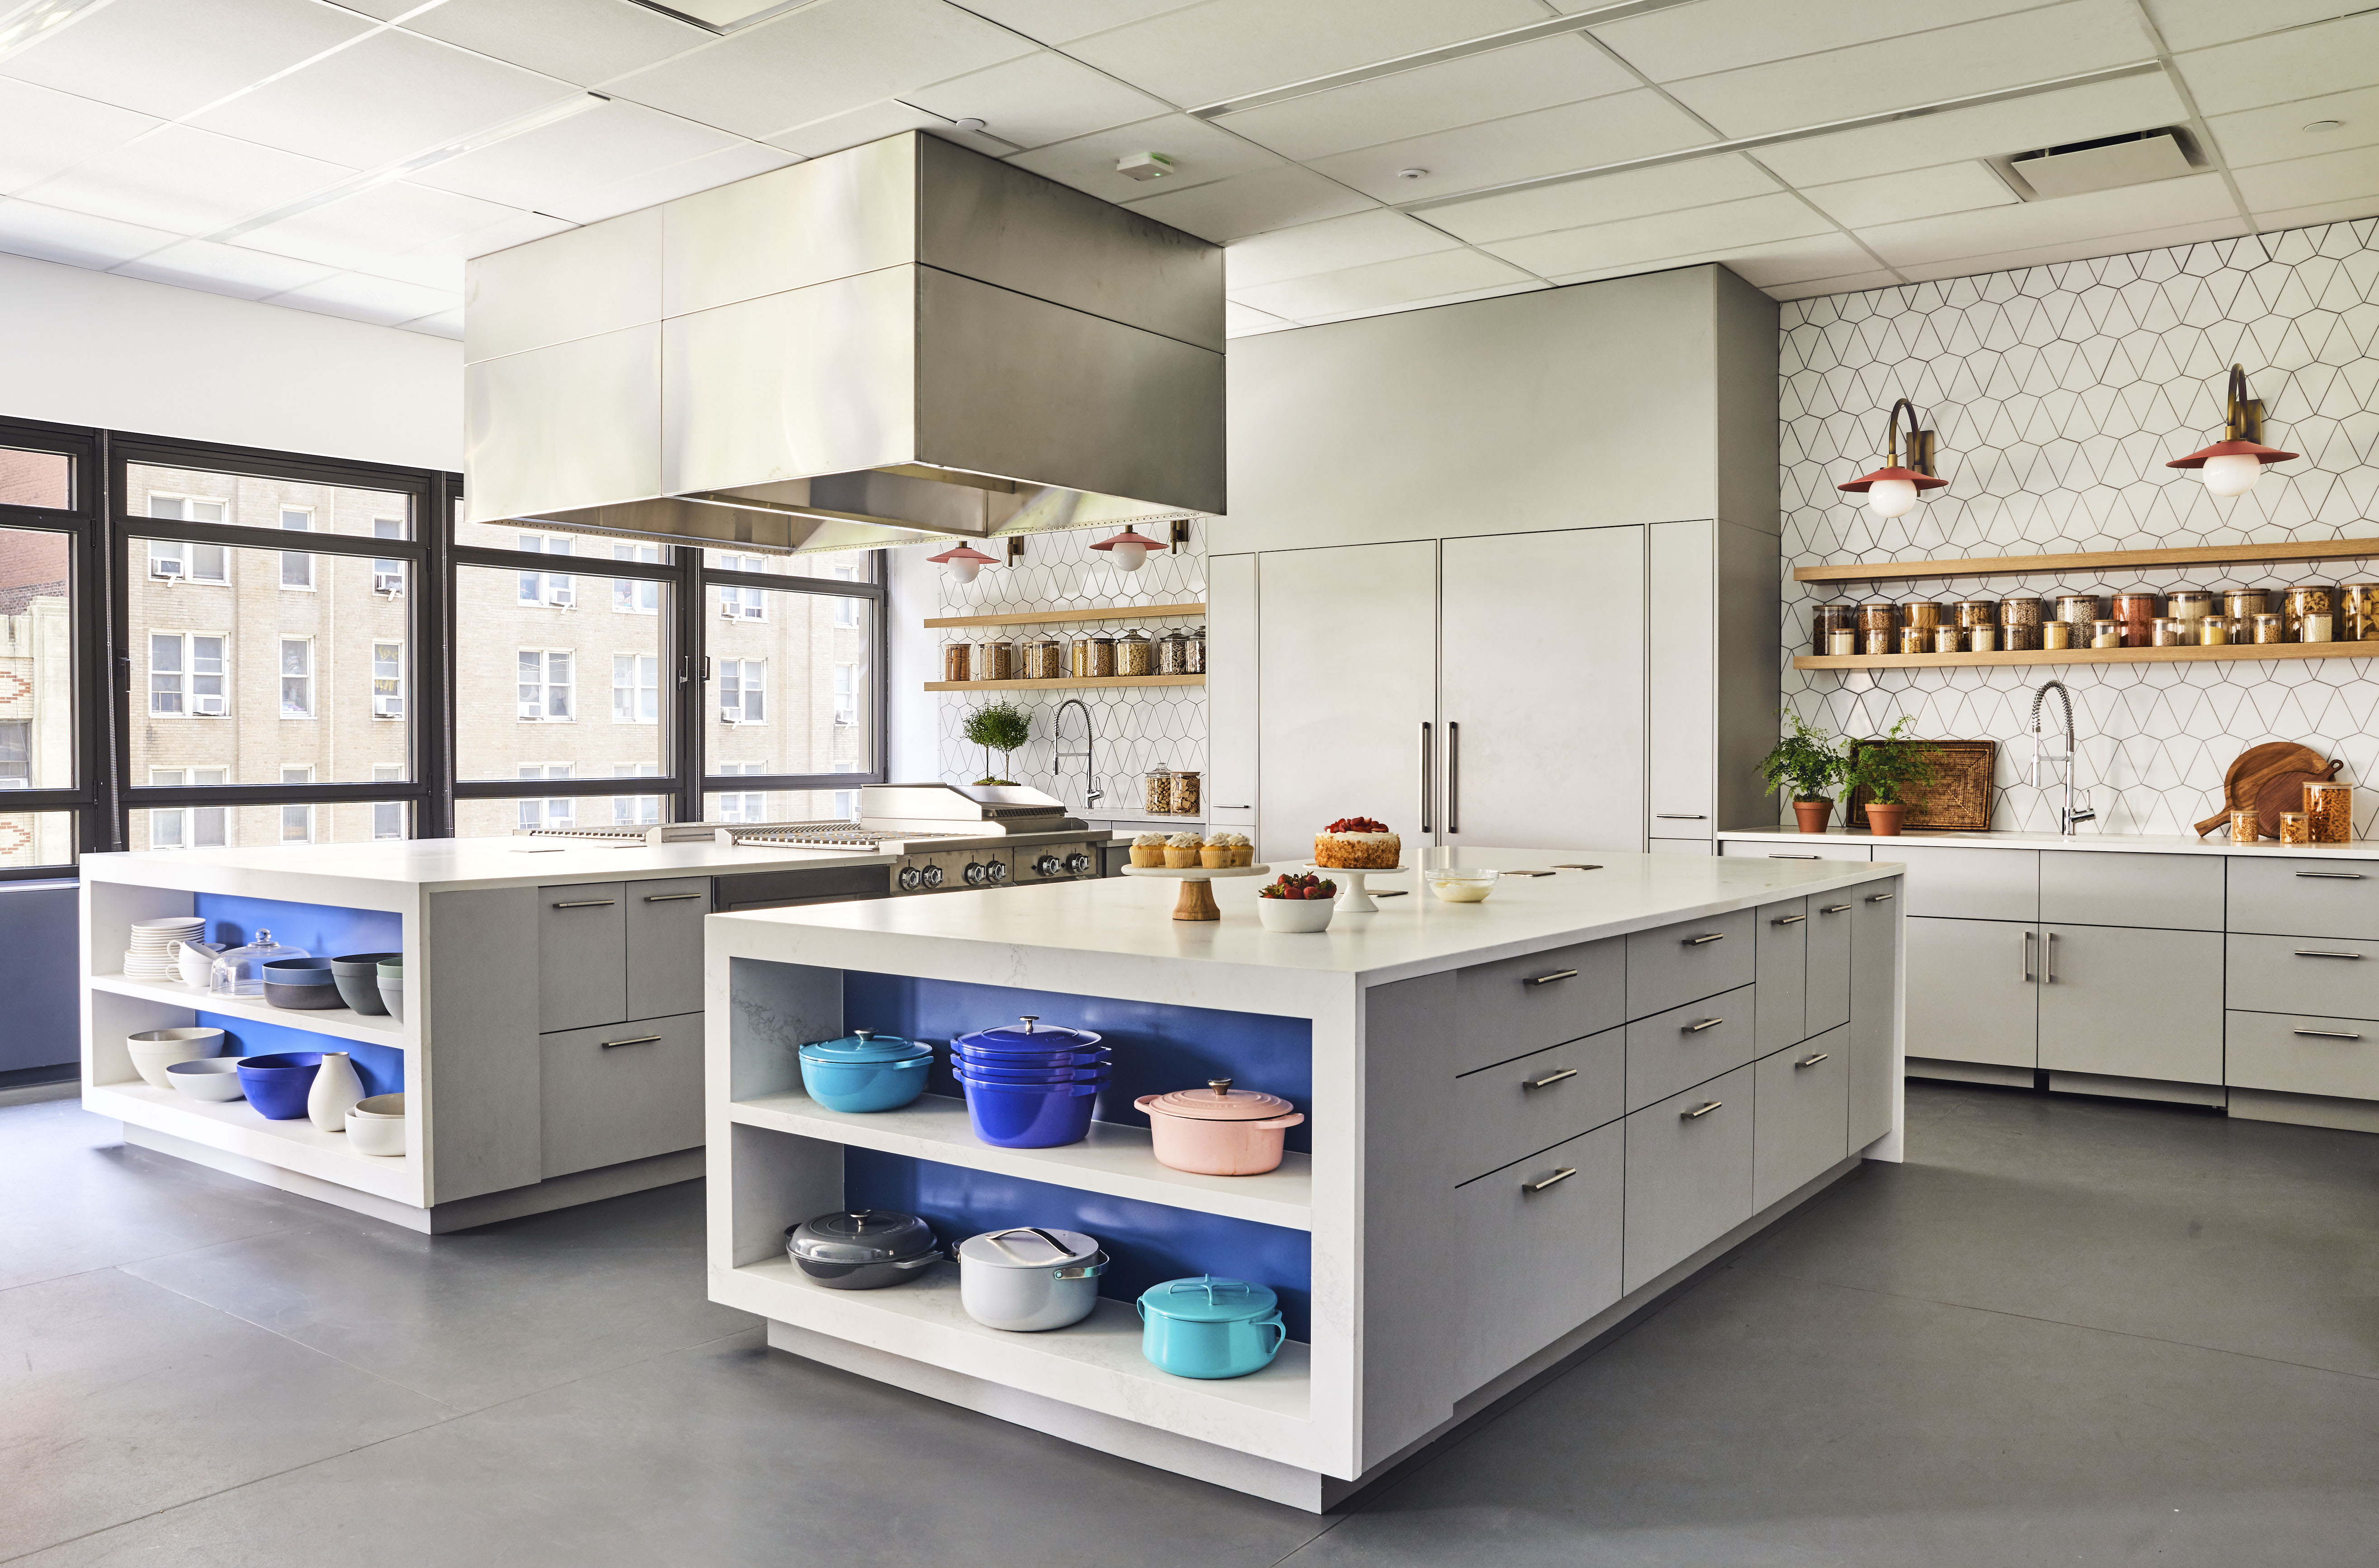 Cover image for  article: Delish Kitchen Studios: Designed to Make Food Even More Fun